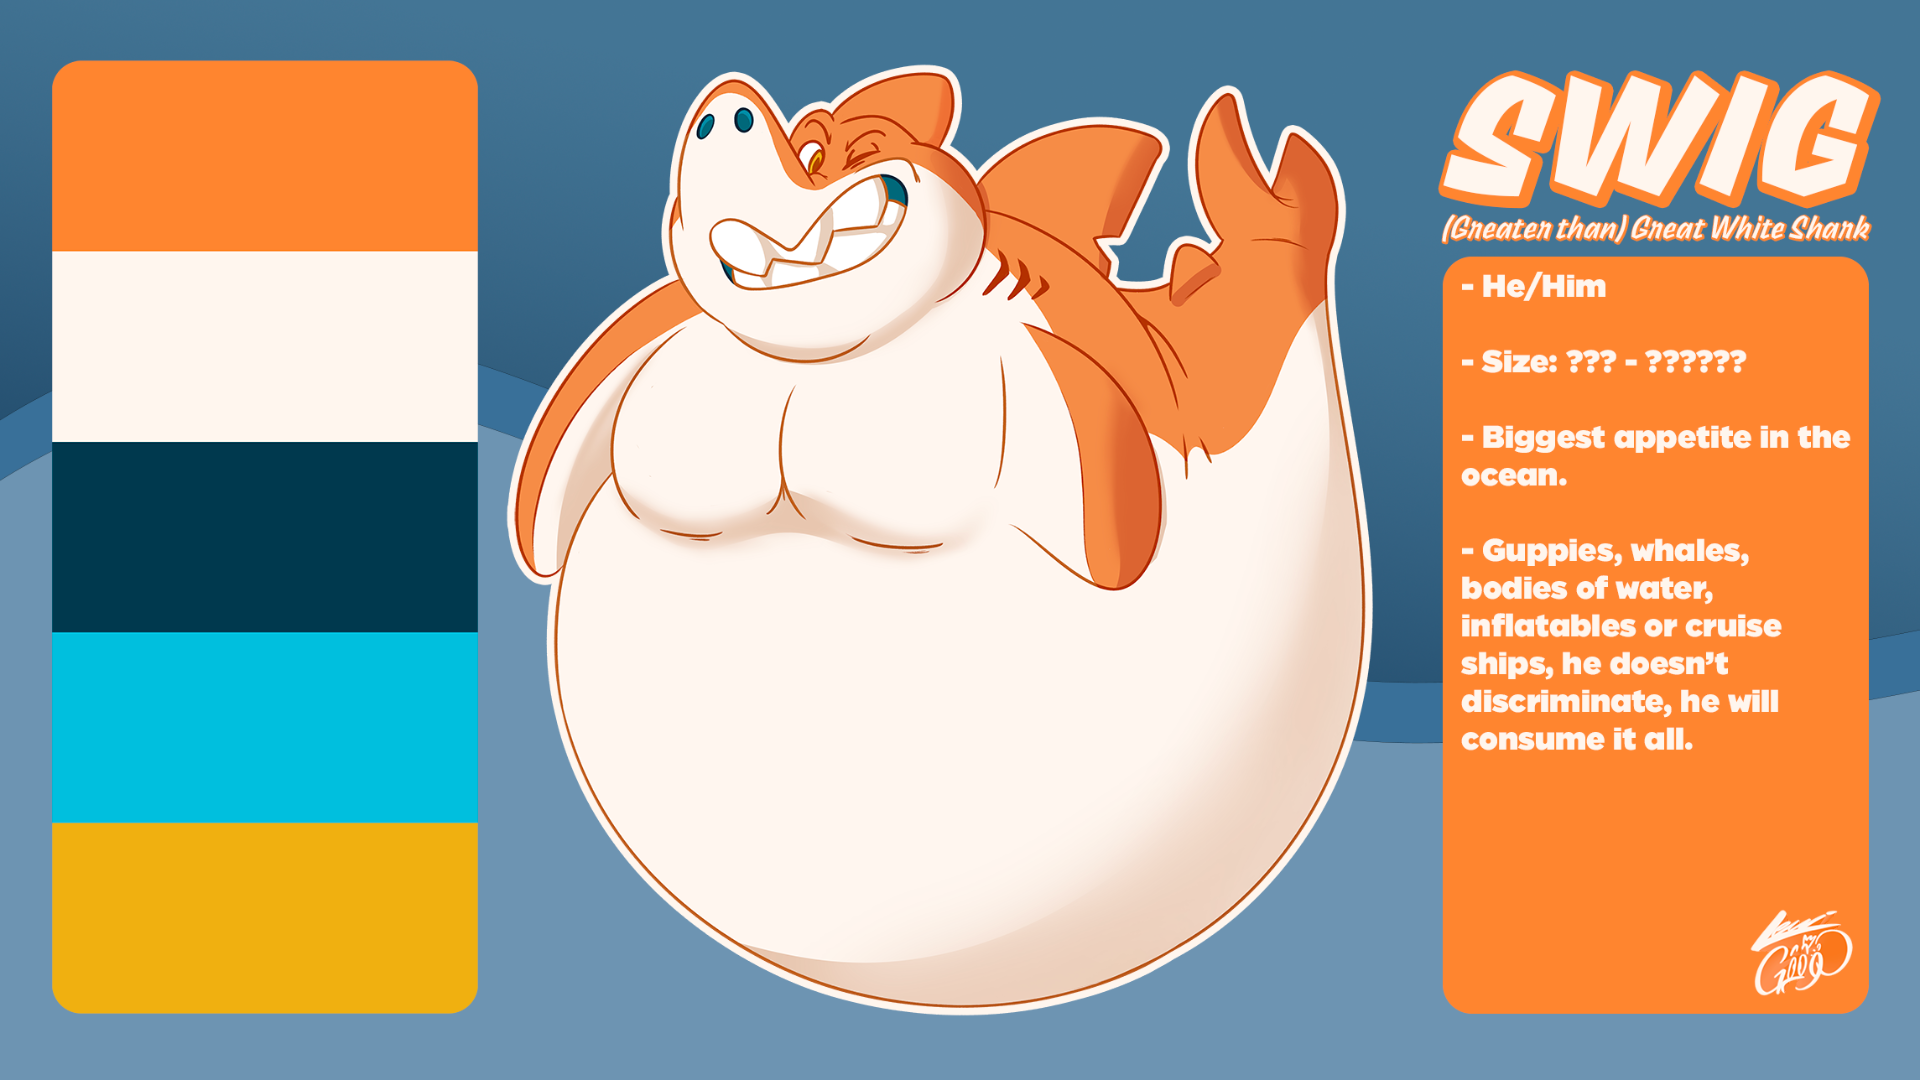 A reference sheet for my sharksona, Swig. It has his color palette which is an orange creamsicle pattern for the body, a couple of largely contrasting shades of blue for his mouth and nostrils, and a pleasant yellow for his irises.

Description:
Swig
(Greater than) Great White Shark

He/Him
Size: ??? to ??????
Biggest appetite in the ocean.
Guppies, whales, bodies of watter, inflatables or cruise ships, he doesn't discriminate, he will consume it all.